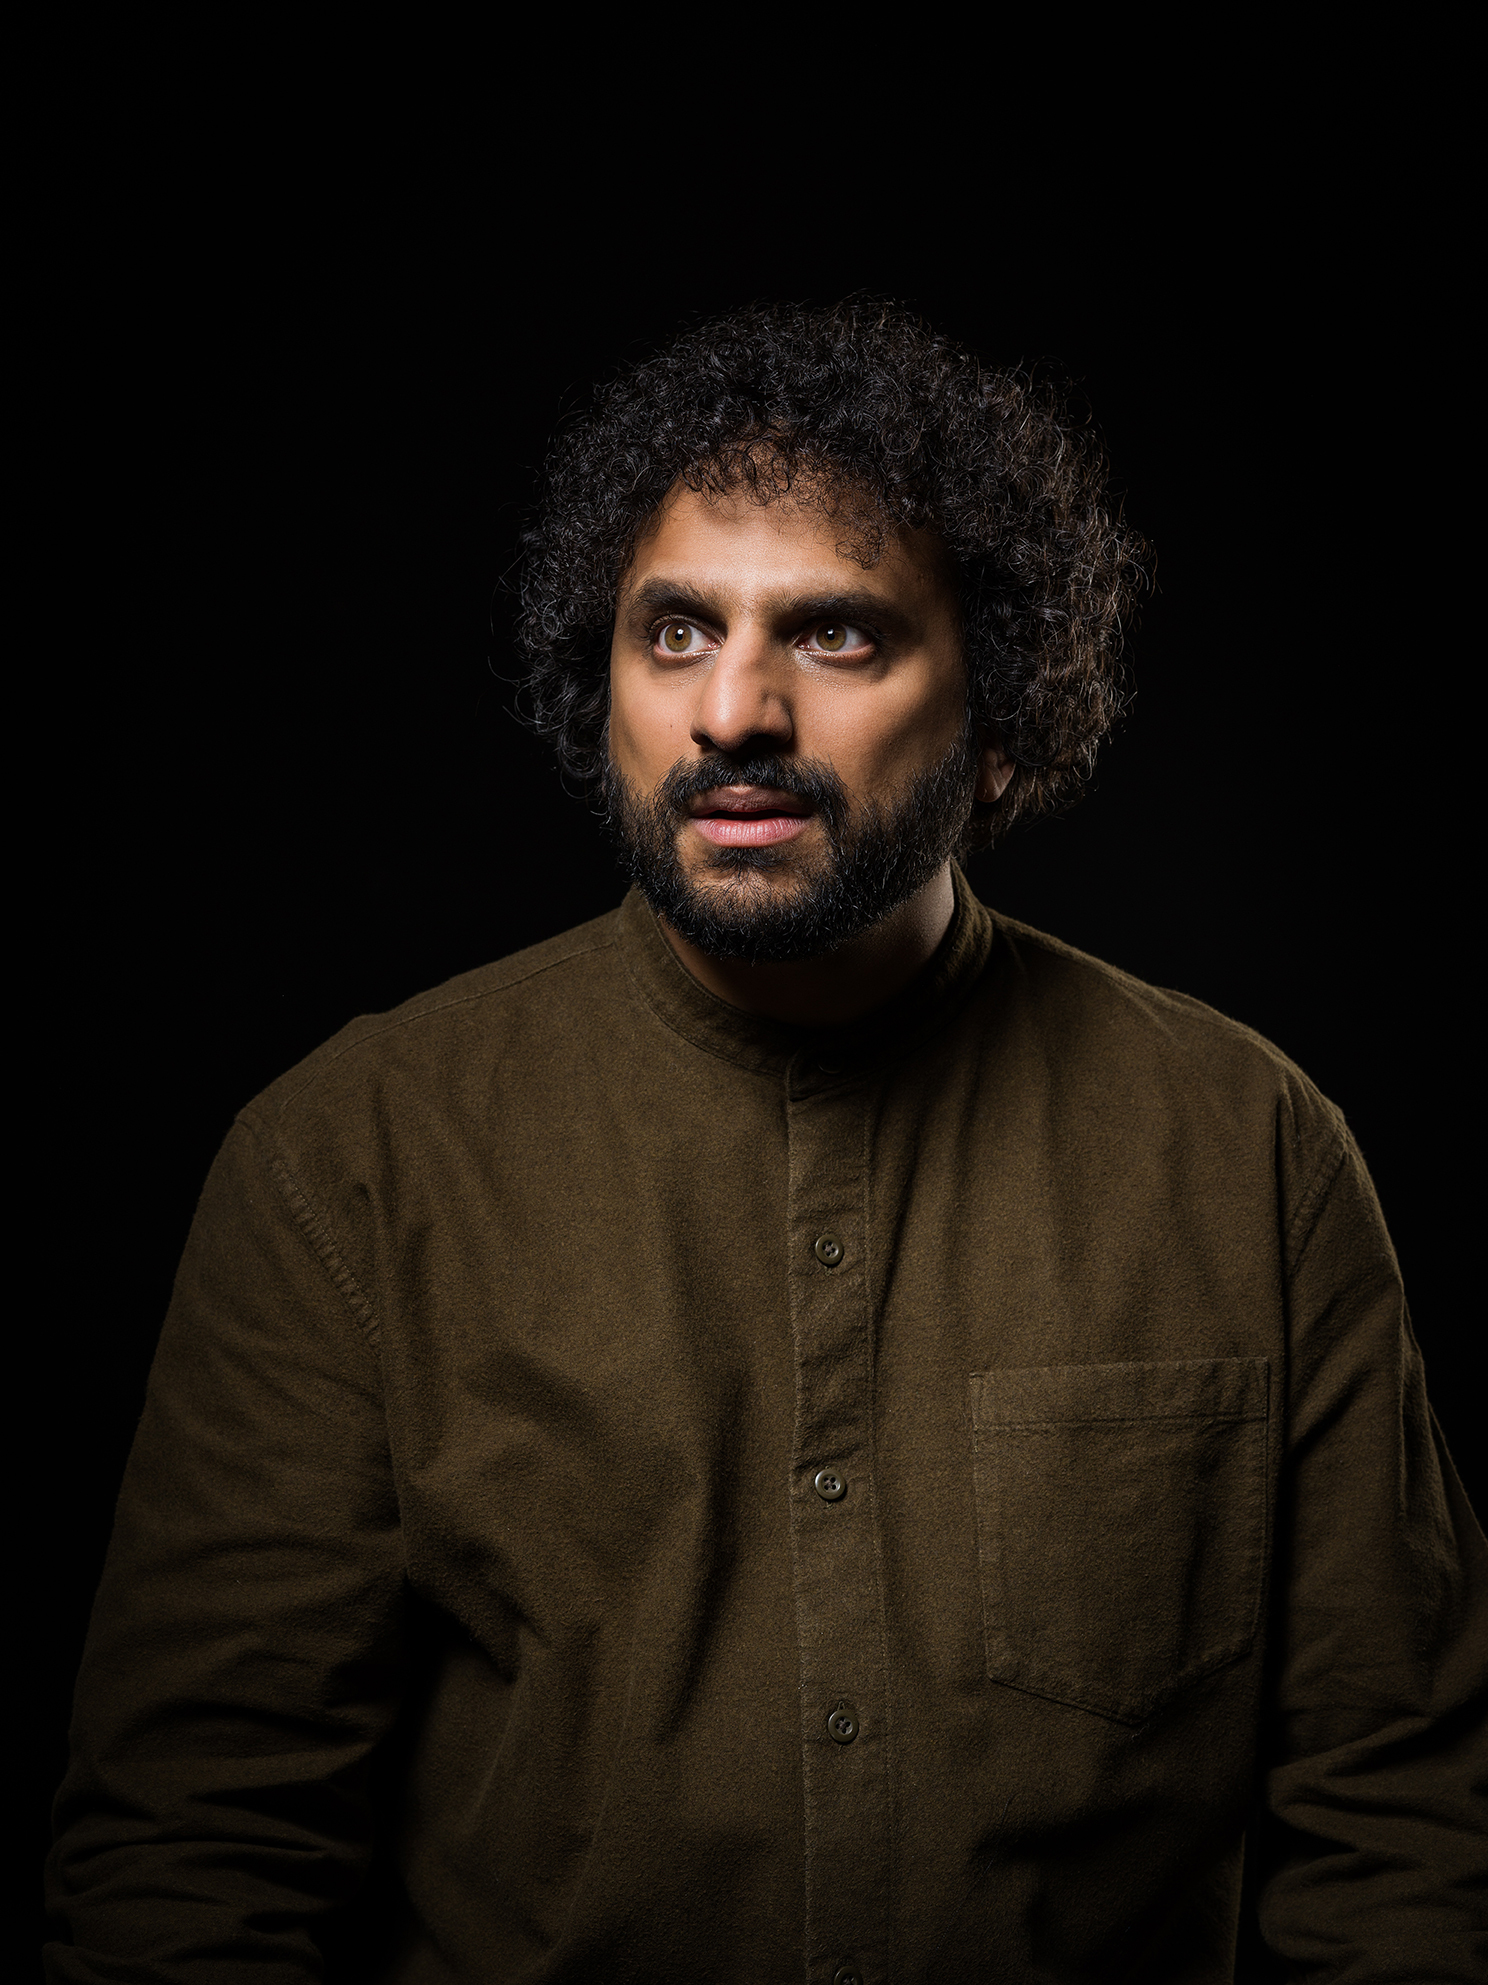 An image of Nish Kumar wearing a brown top, looking off to the side.